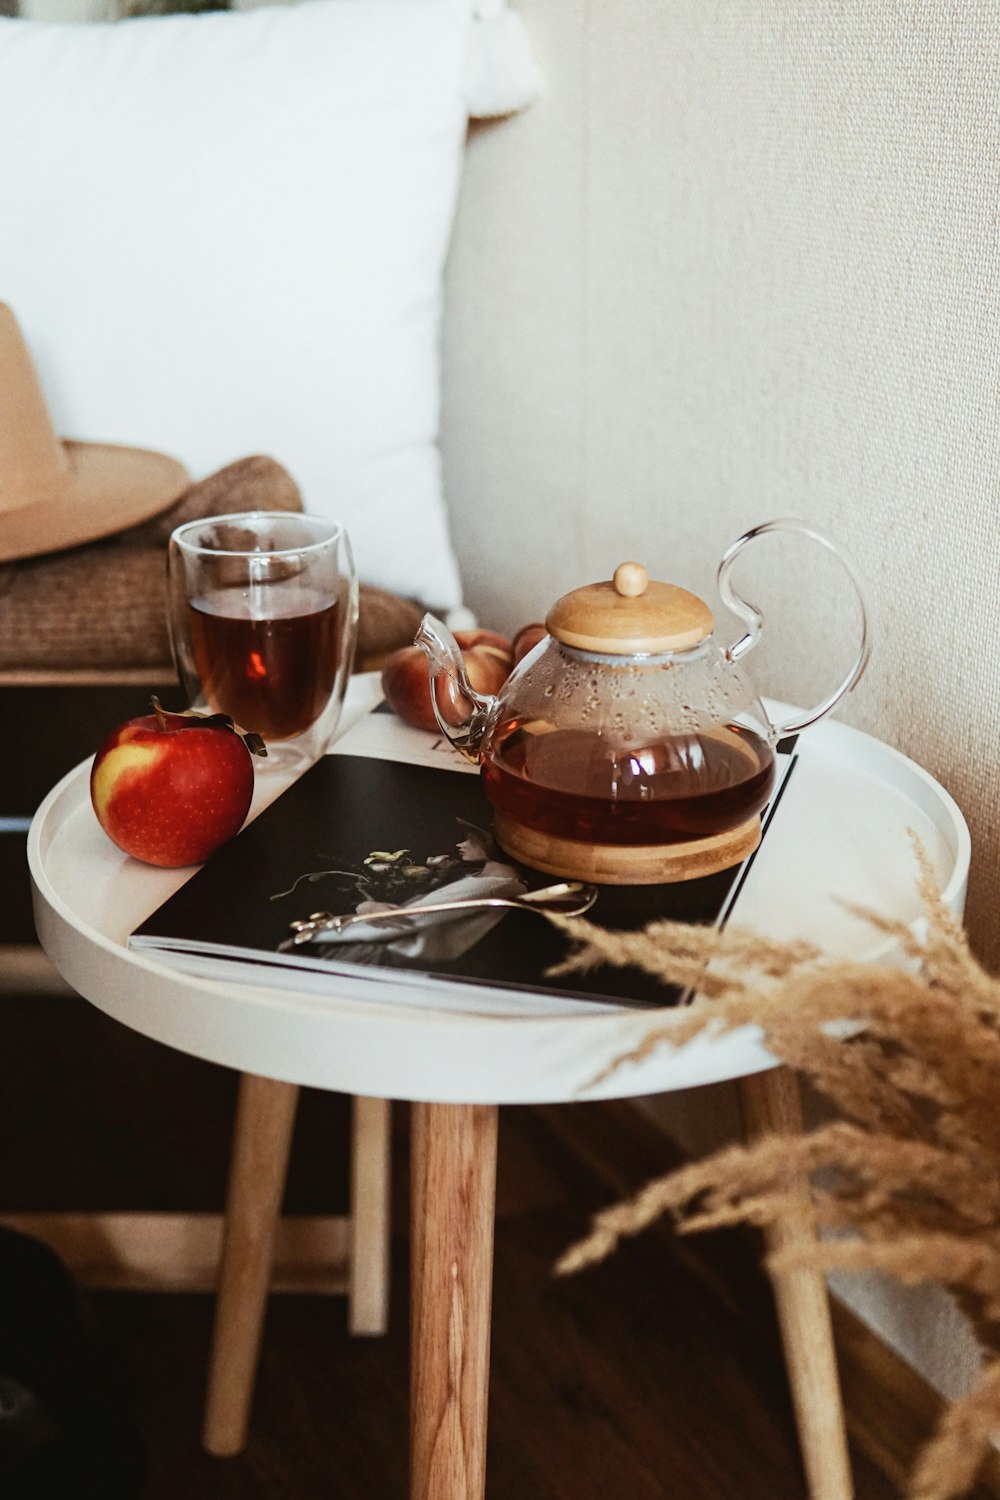 teapot near gray stainless steel teaspoon, red apple fruit, and clear glass mug on round white wooden end table